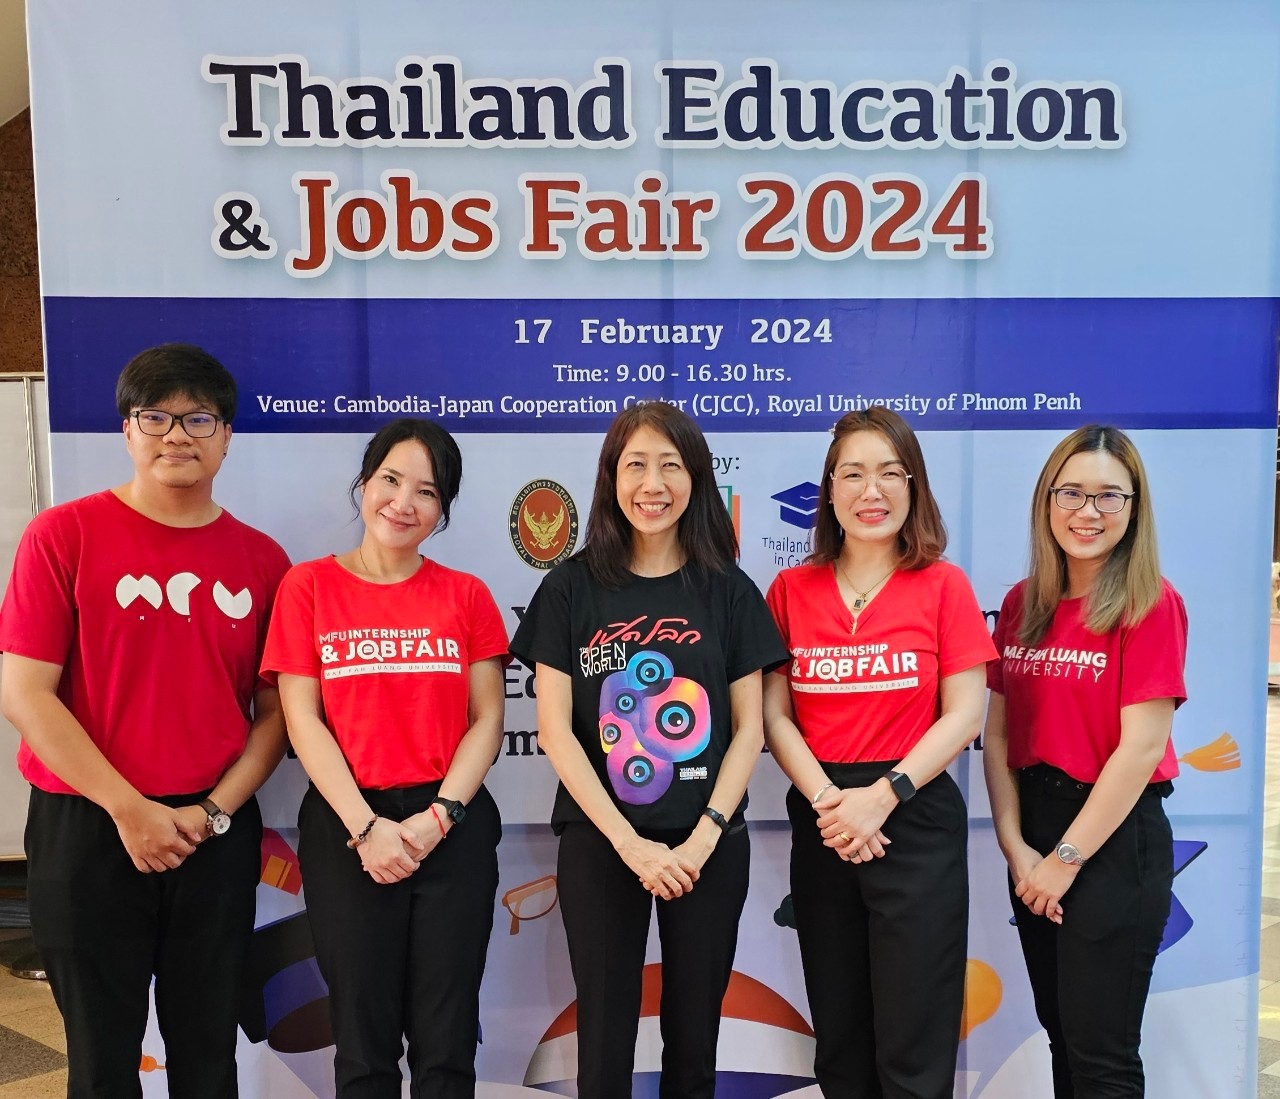 A Visit to Cambodia to Deepen Academic Cooperation and Attend Thailand Education and Jobs Fair 2024